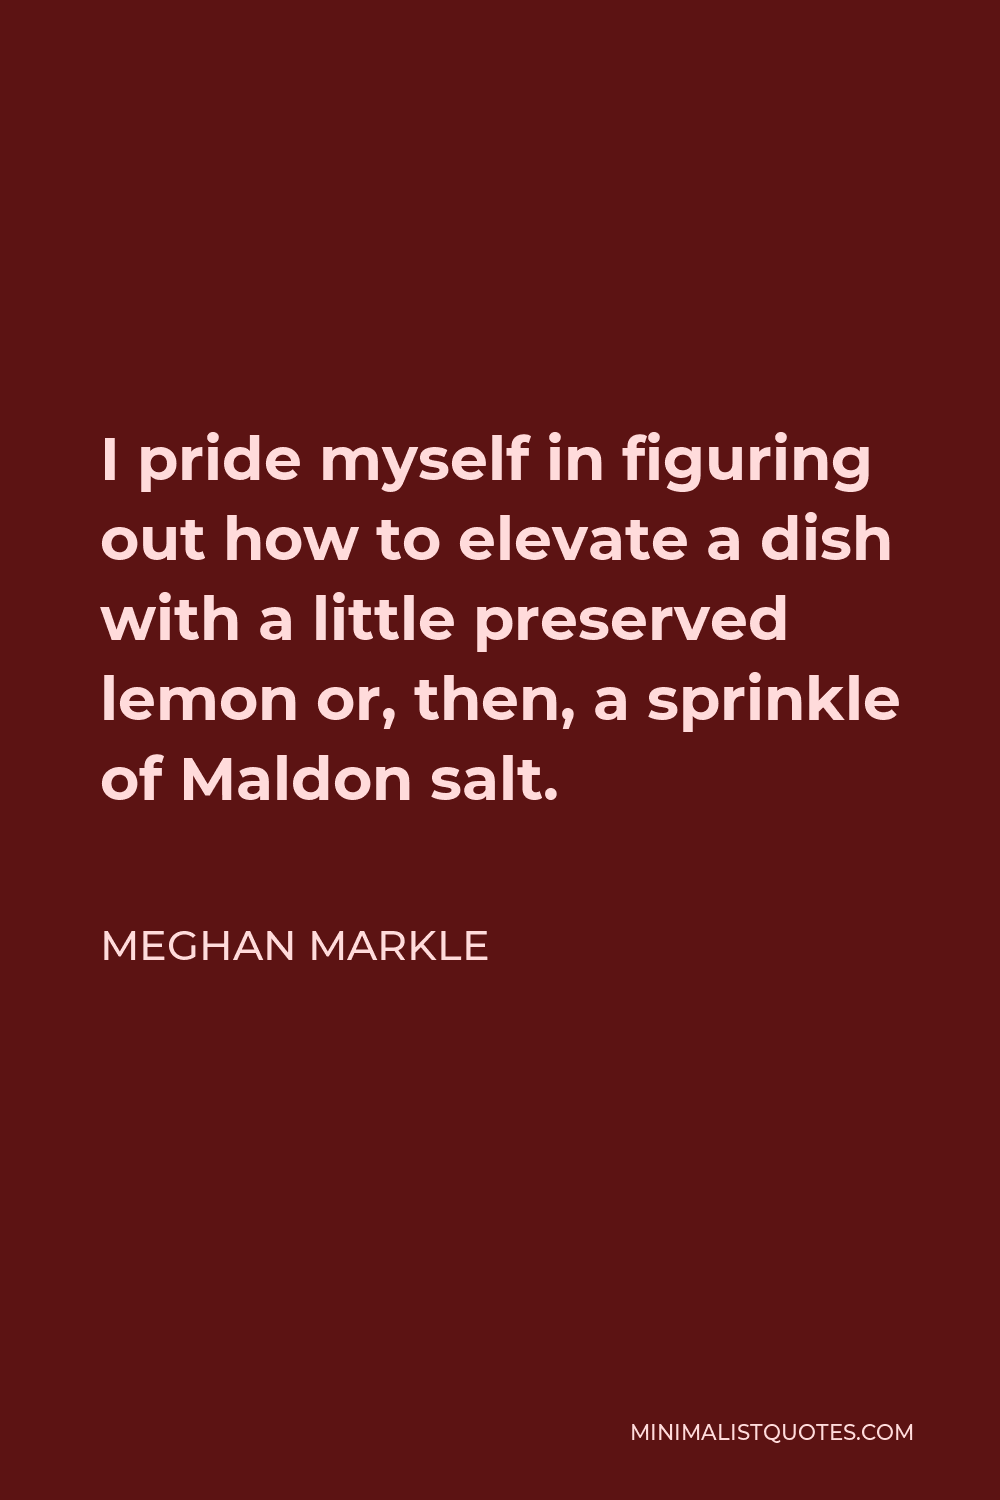 Meghan Markle Quote - I pride myself in figuring out how to elevate a dish with a little preserved lemon or, then, a sprinkle of Maldon salt.